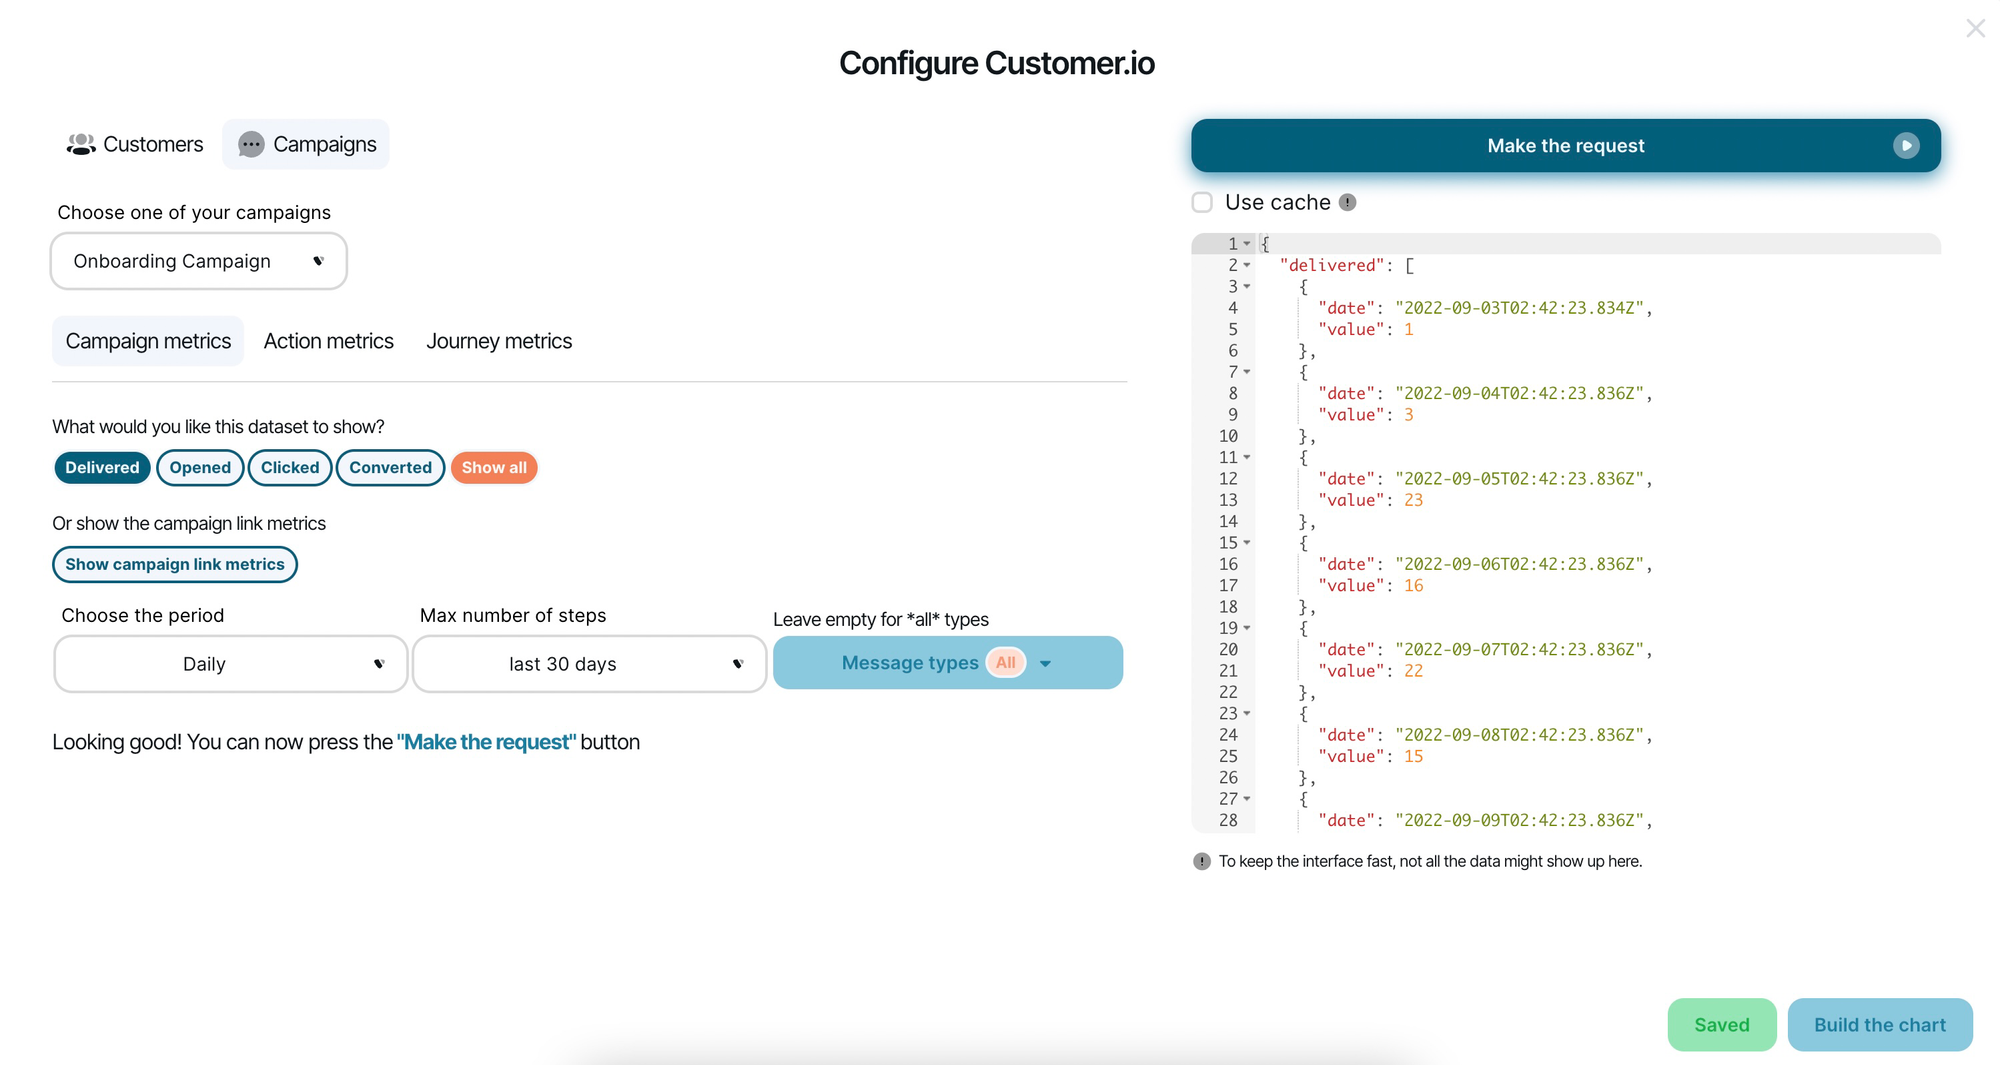 Fetching data from customer.io using the Chartbrew integration